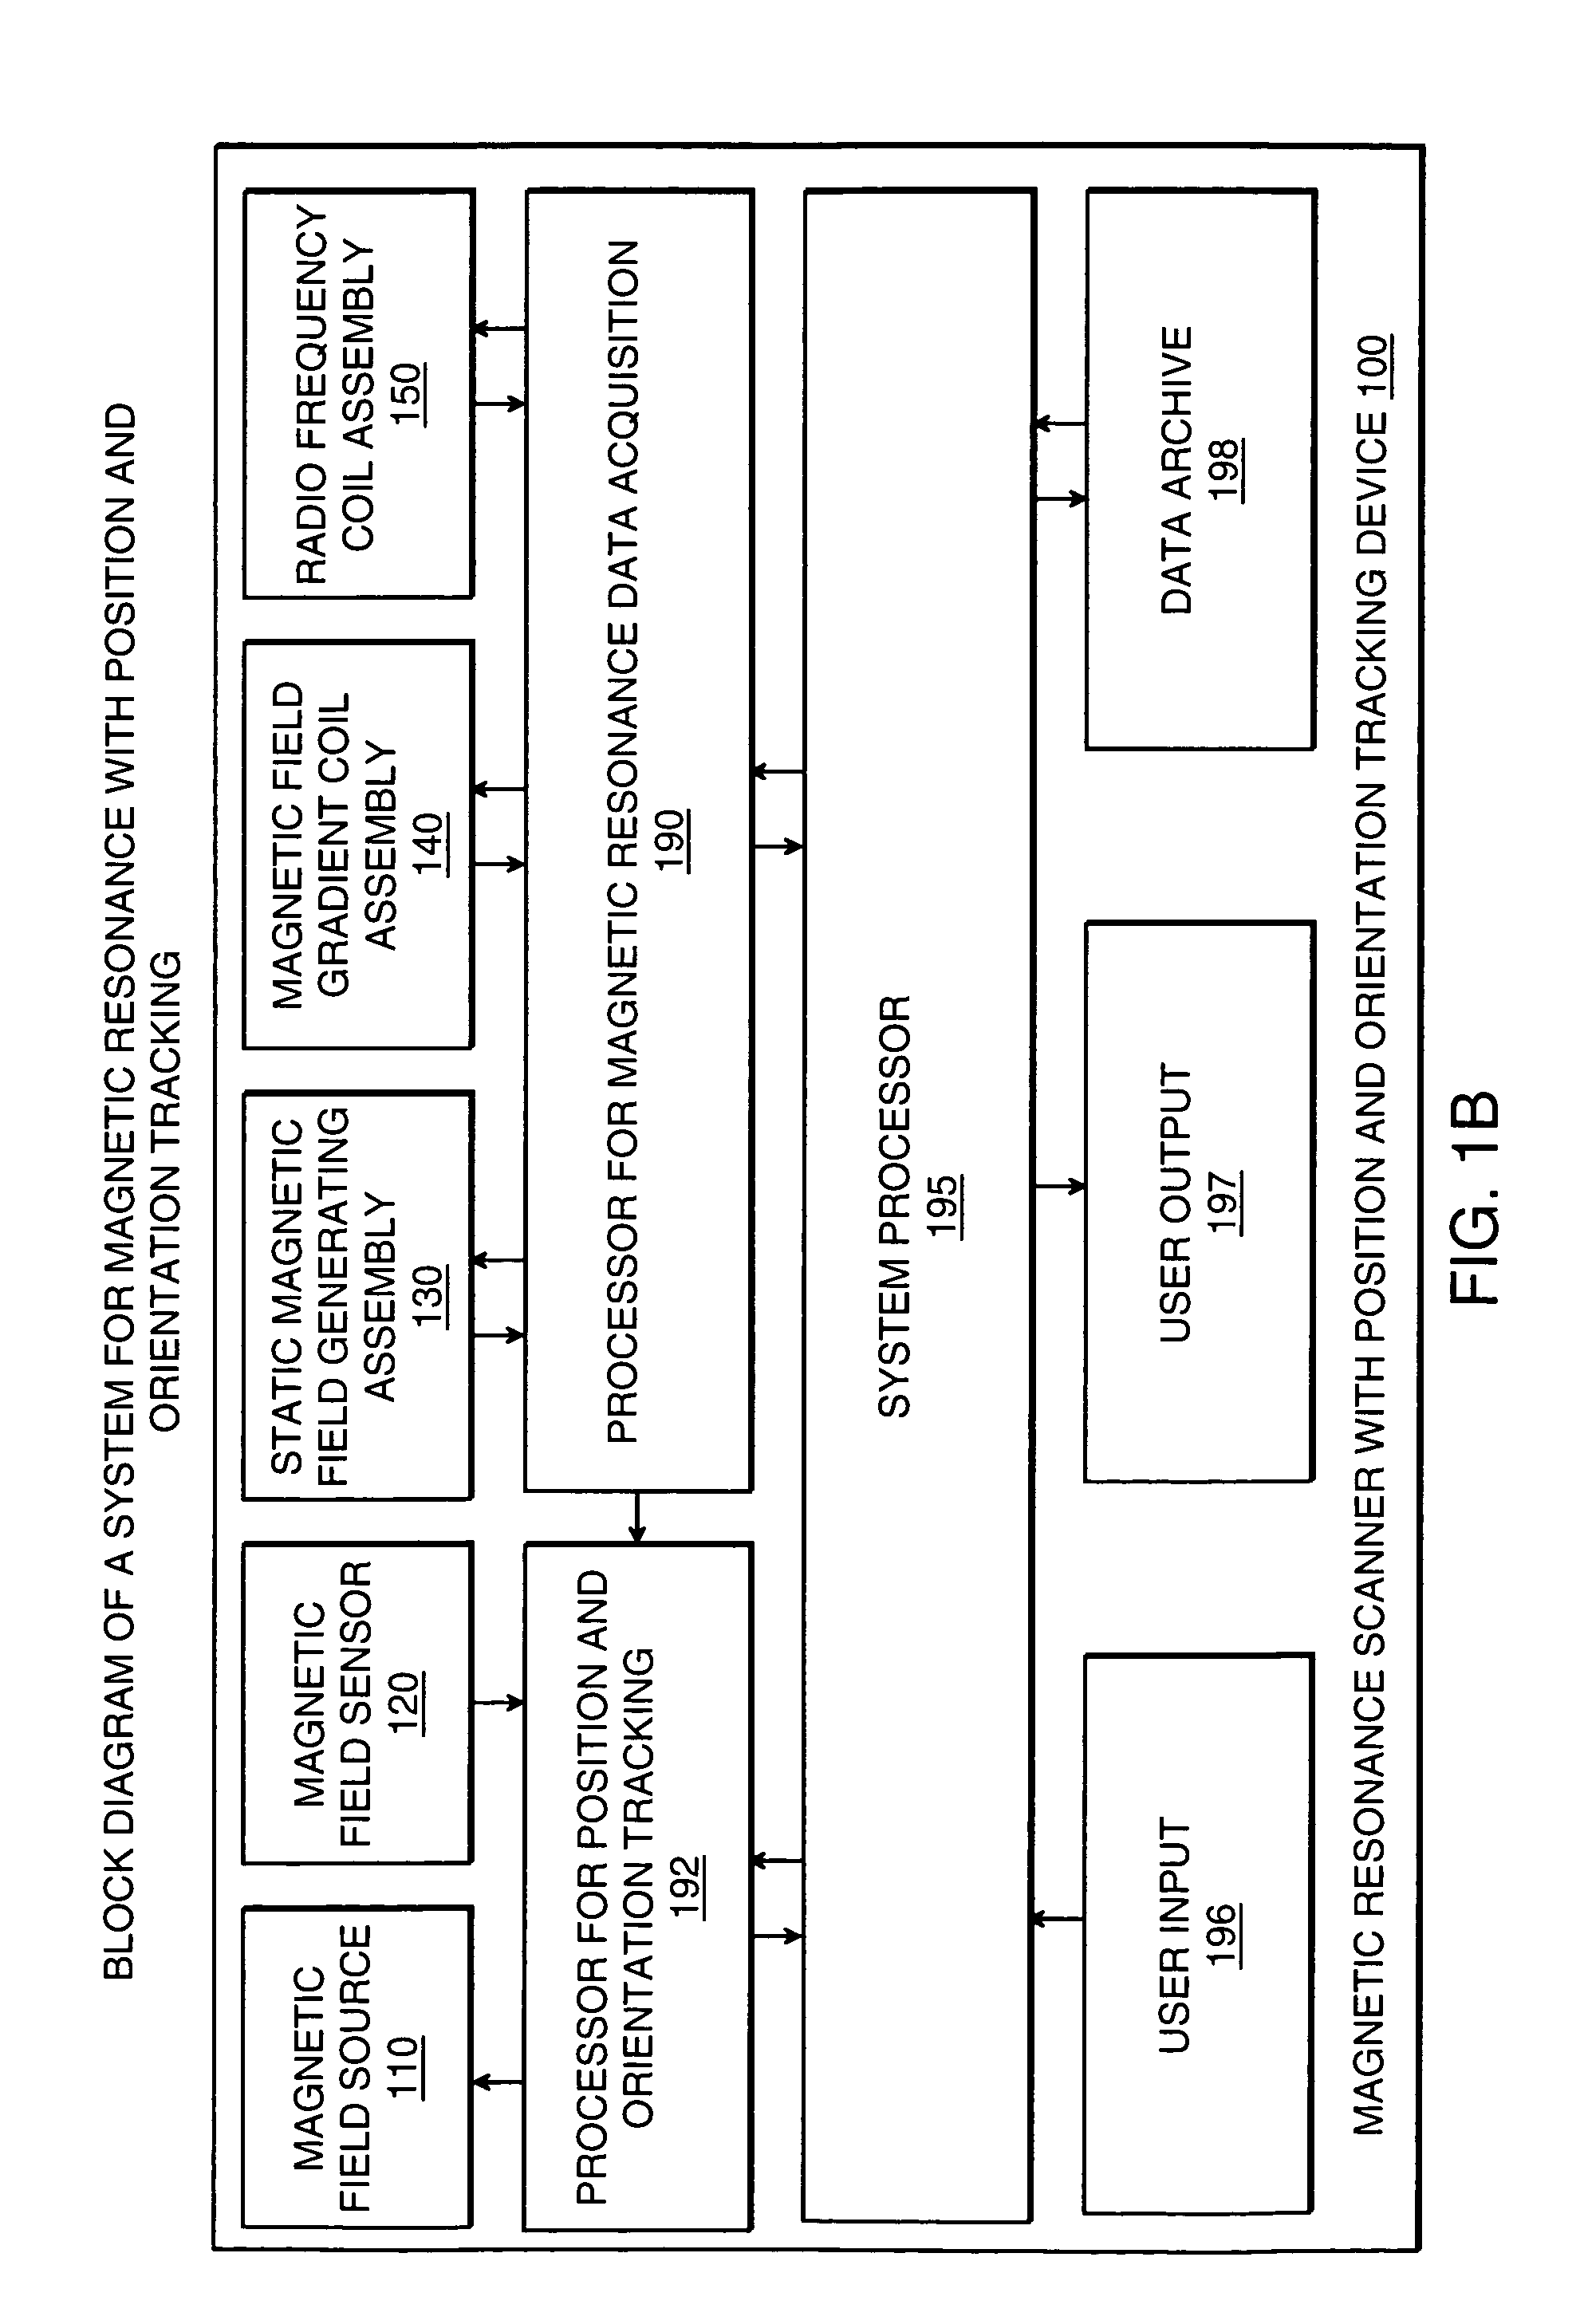 Magnetic resonance scanner with electromagnetic position and orientation tracking device